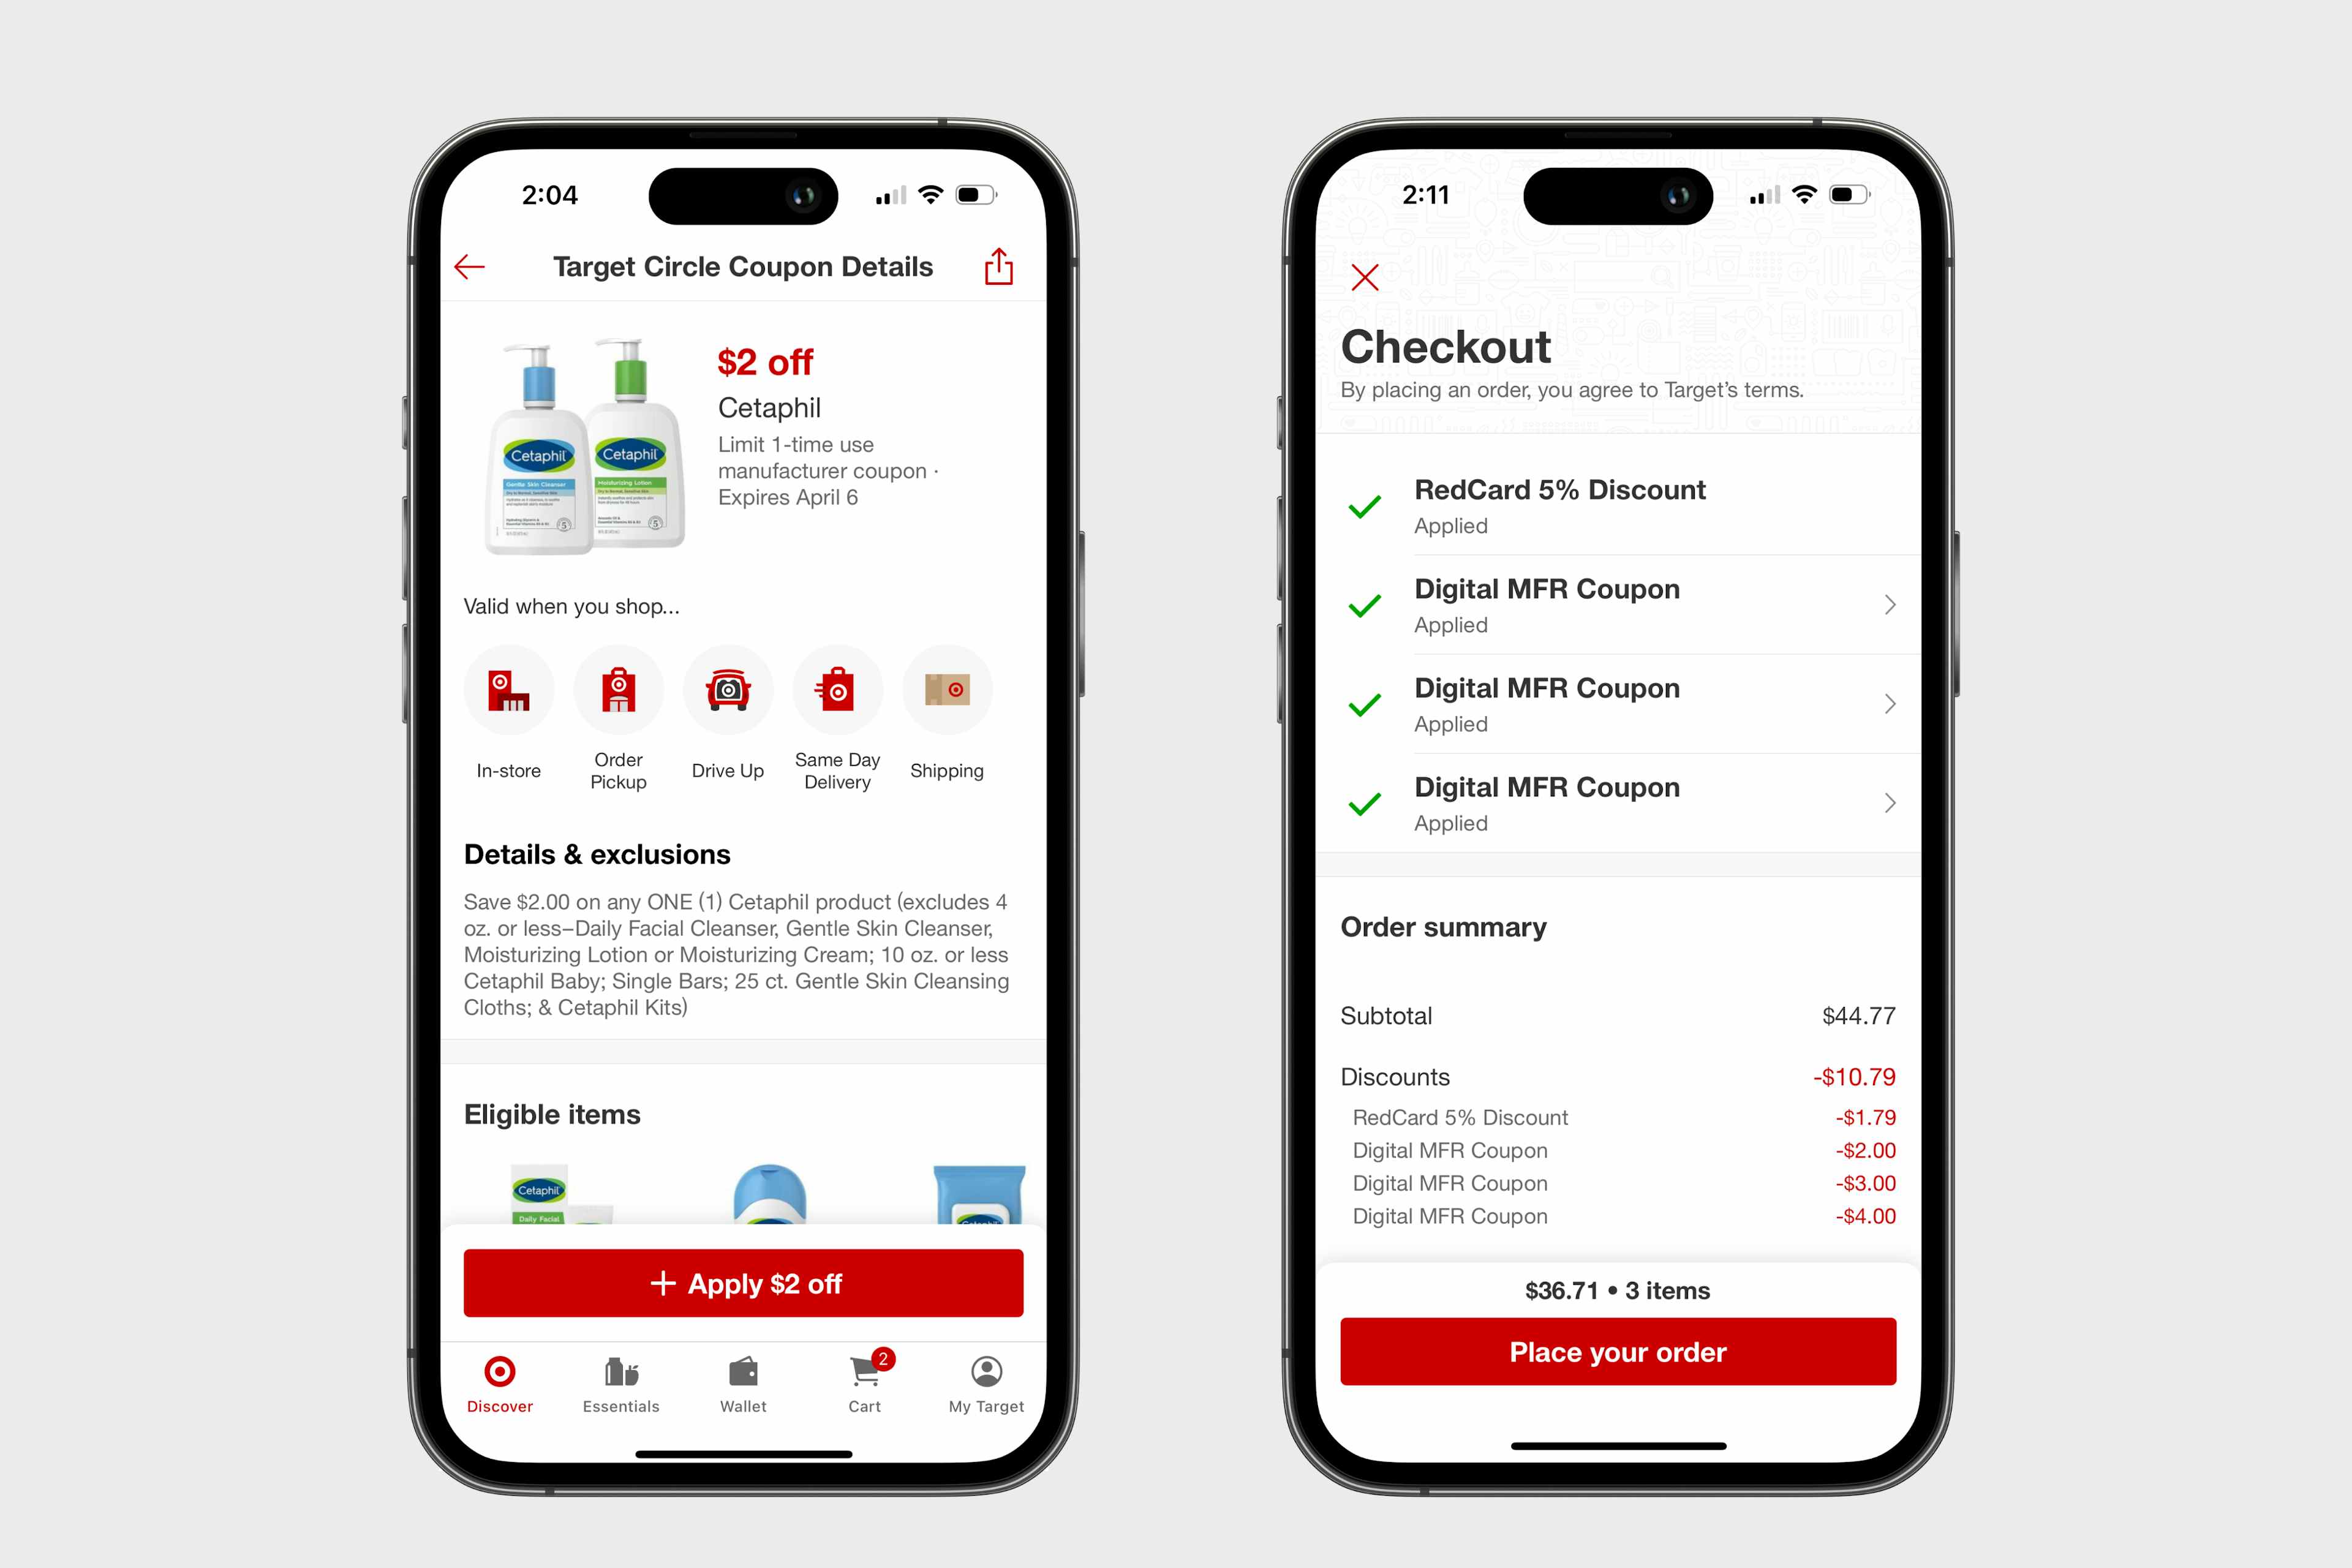 how-to-coupon-at-target-circle-360-rewards-app-manufacturer-coupons-applied-online